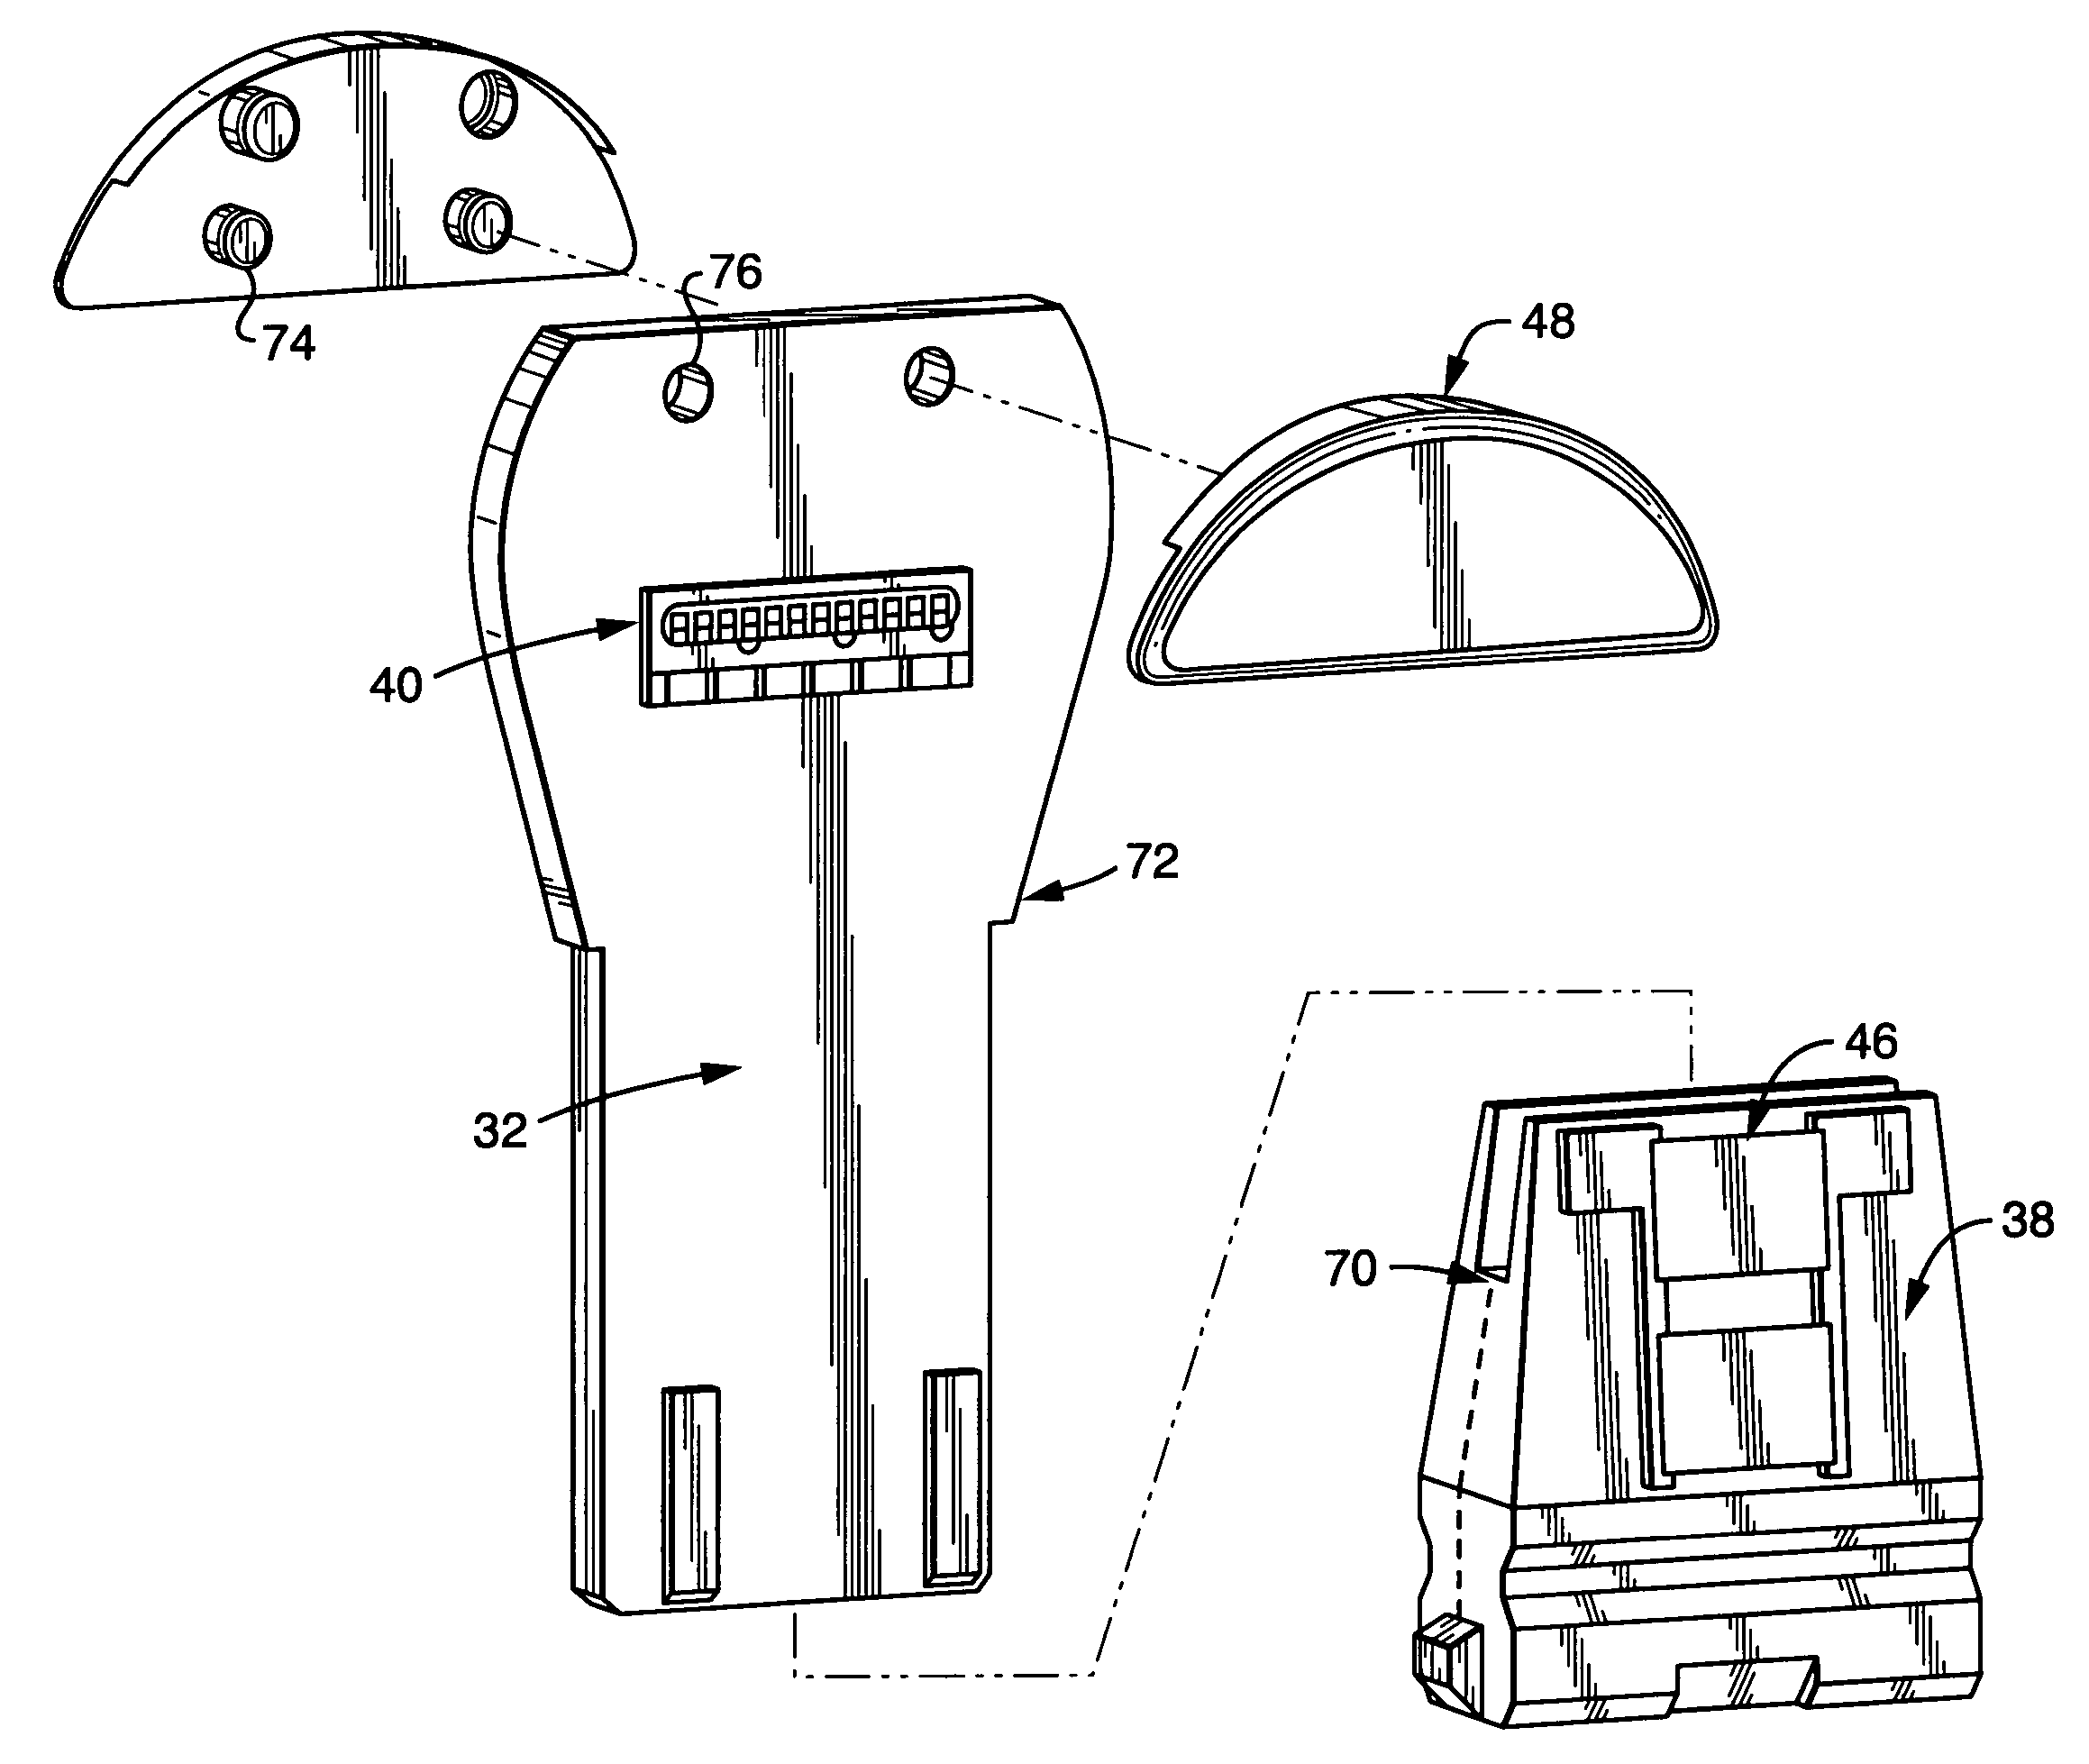 Wedge-based lamp with LED light engine and method of making the lamp